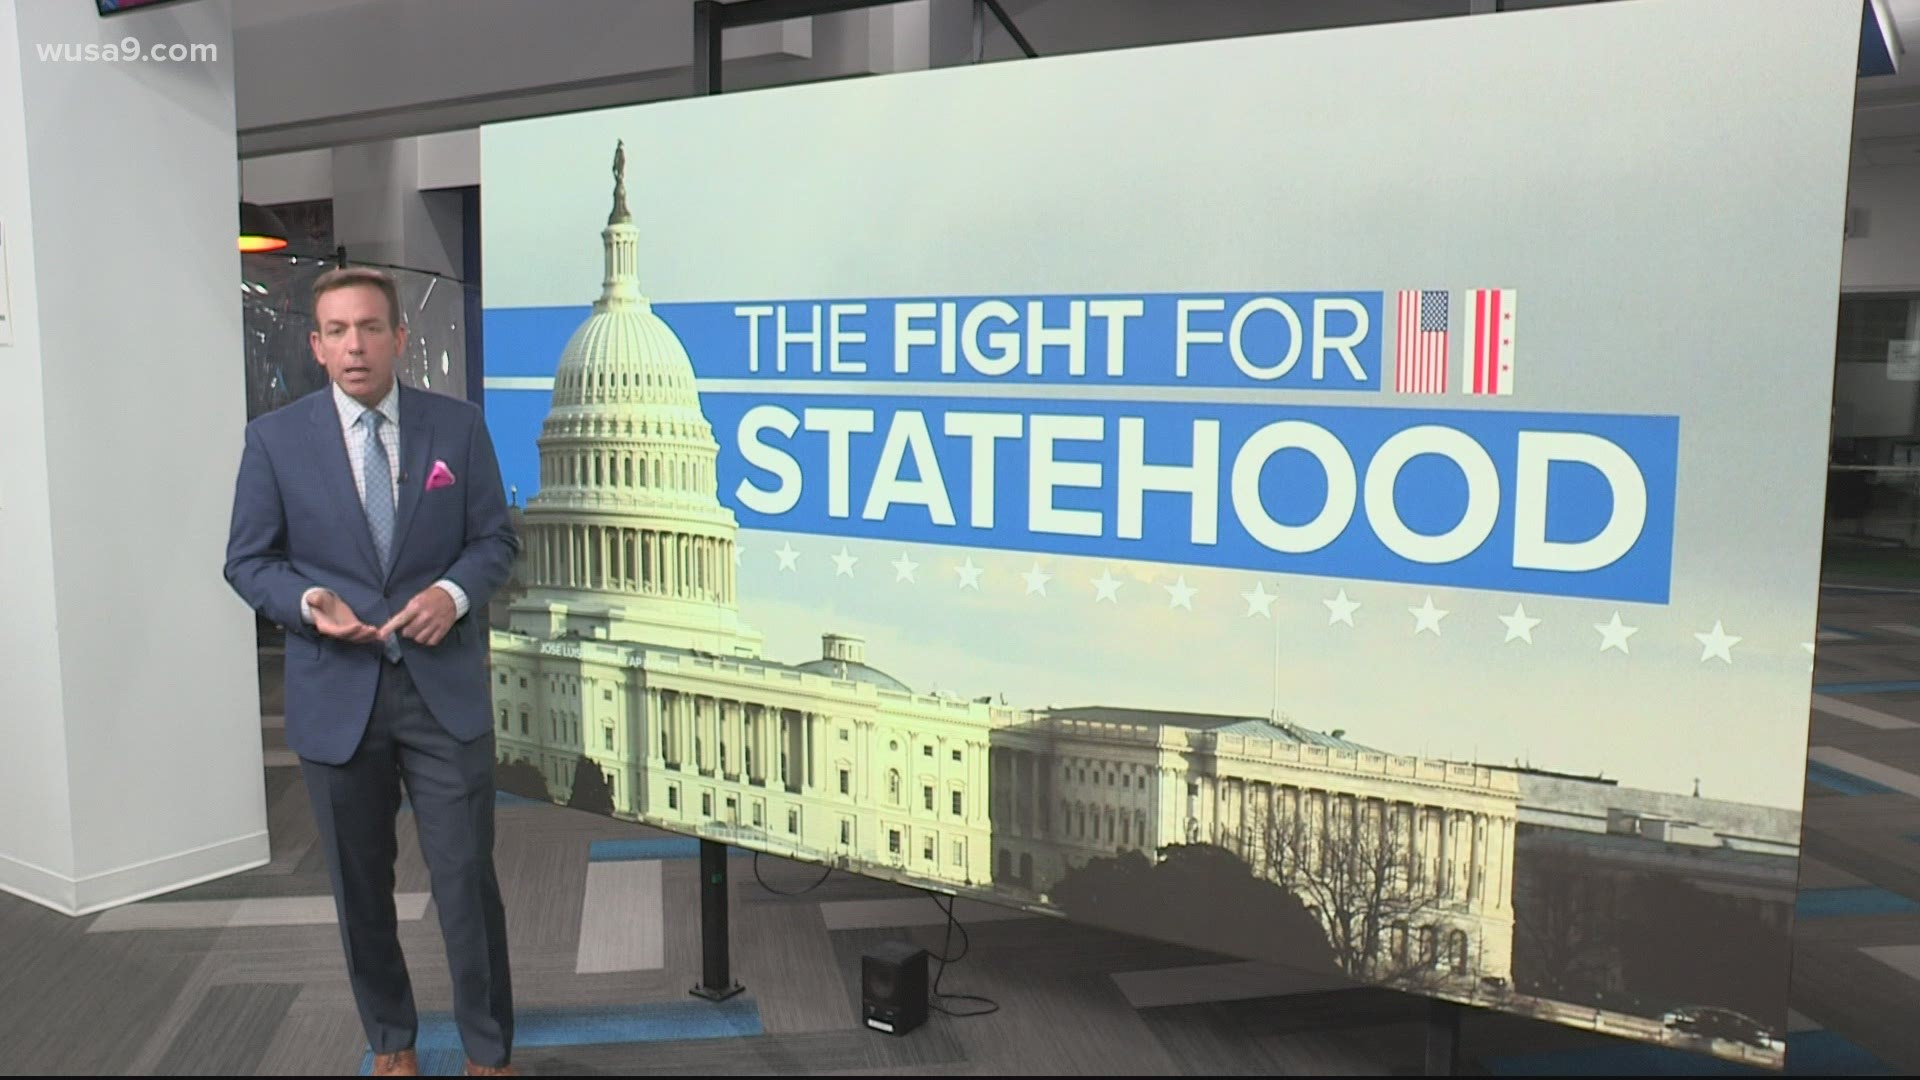 Before a Wednesday committee hearing in the U.S. House of Representatives, WUSA9 updates you on the fight for DC statehood.